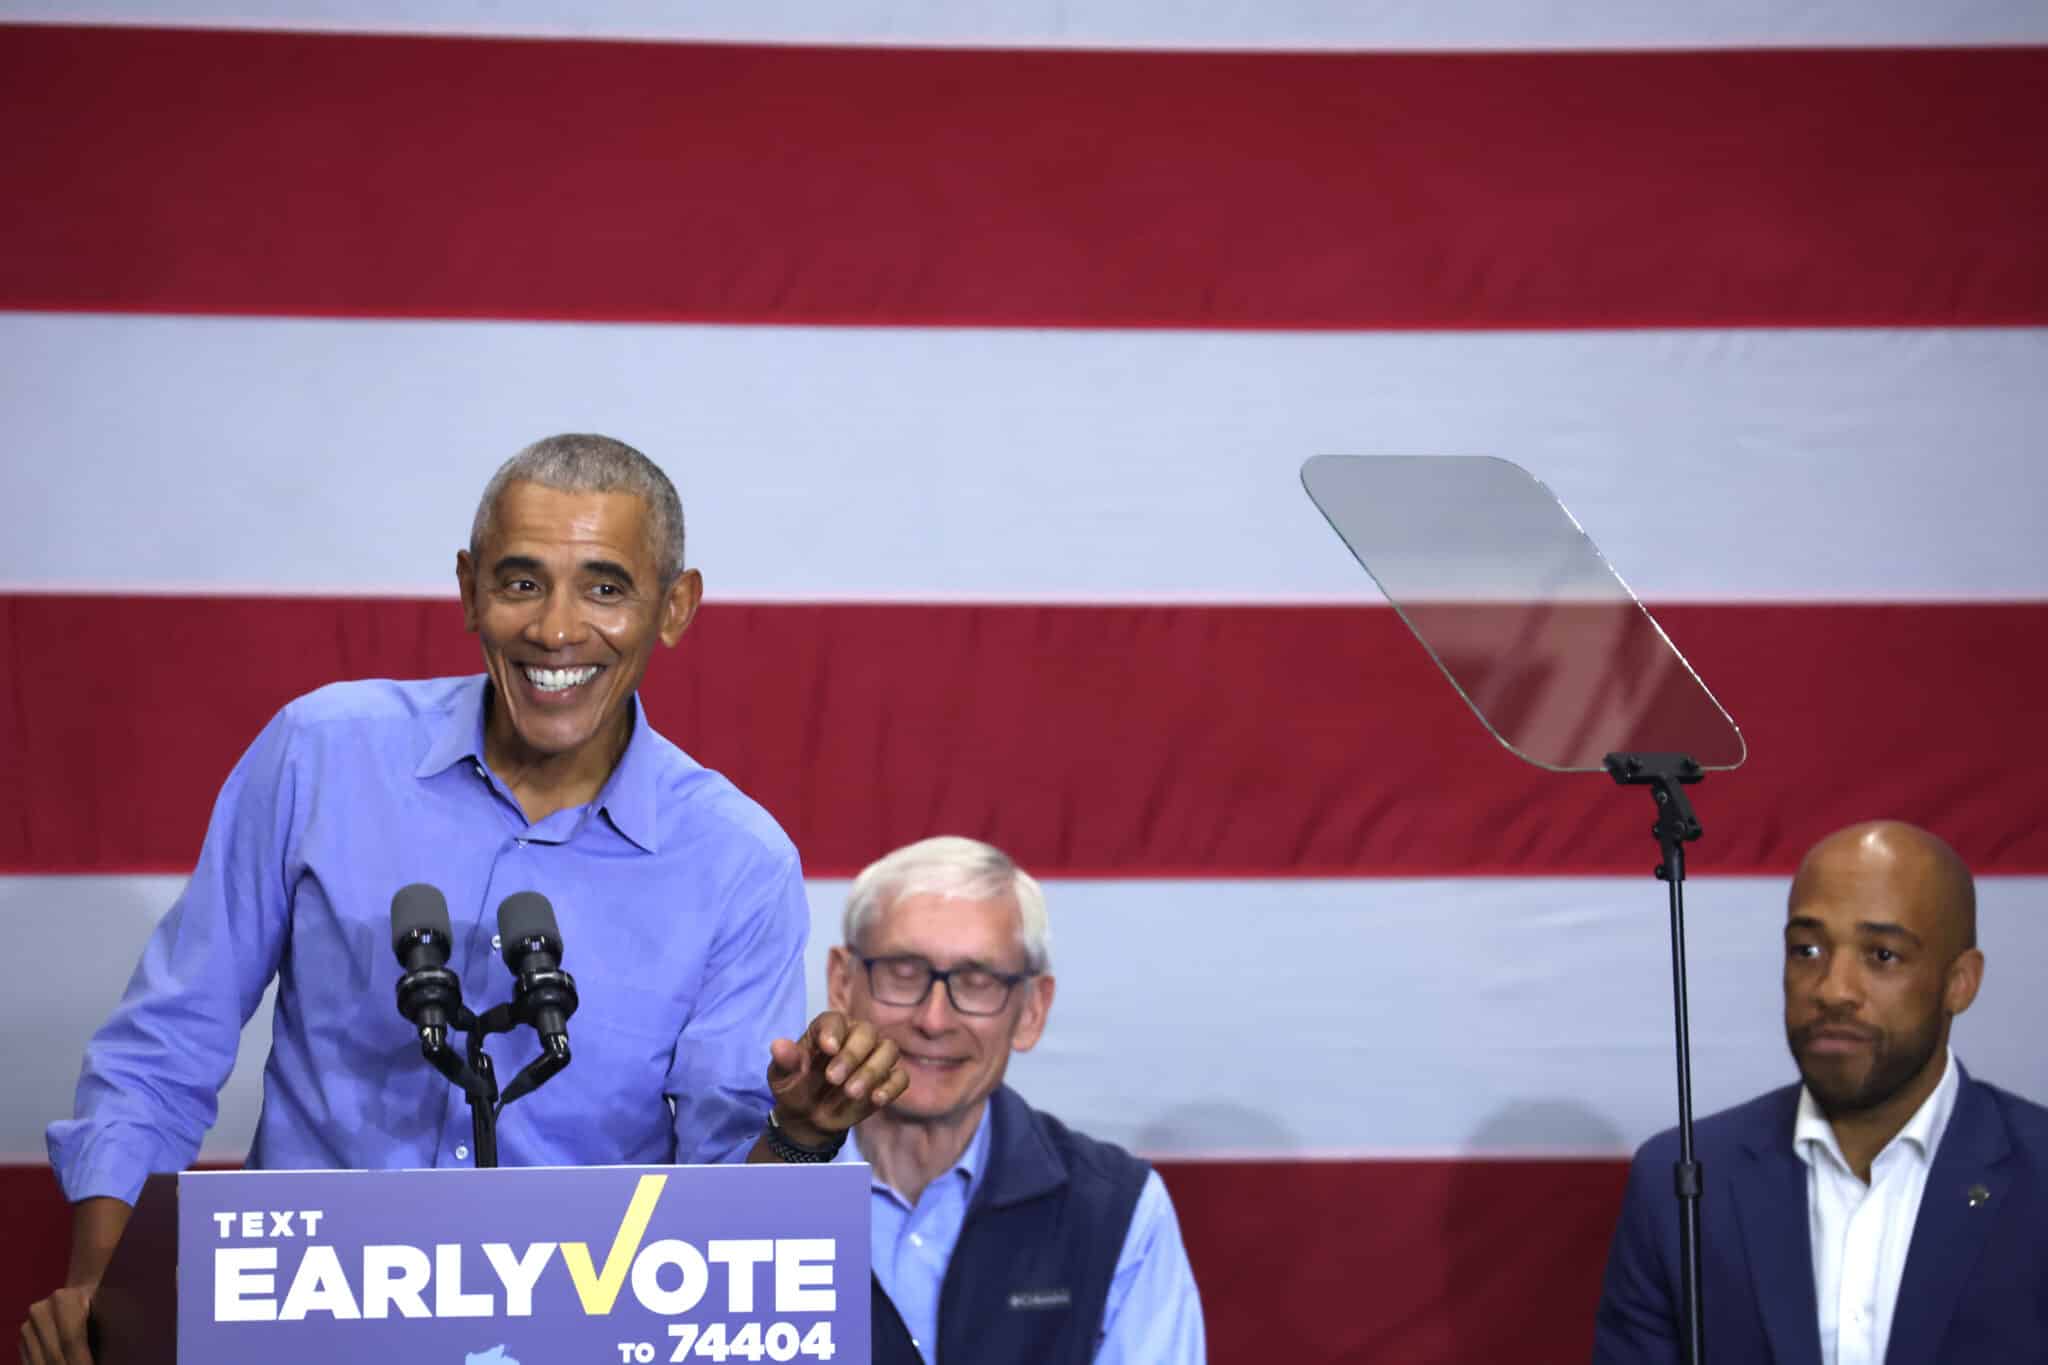 MILWAUKEE, WISCONSIN - OCTOBER 29: Former US President Barack Obama speaks at a rally to support Wisconsin Governor Tony Evers and Democratic candidate for U.S. Senate in Wisconsin Mandela Barnes on October 29, 2022 in Milwaukee, Wisconsin. Evers and Barnes, who currently serves as the state's lieutenant governor, are both facing close mid-term races. (Photo by Scott Olson/Getty Images)